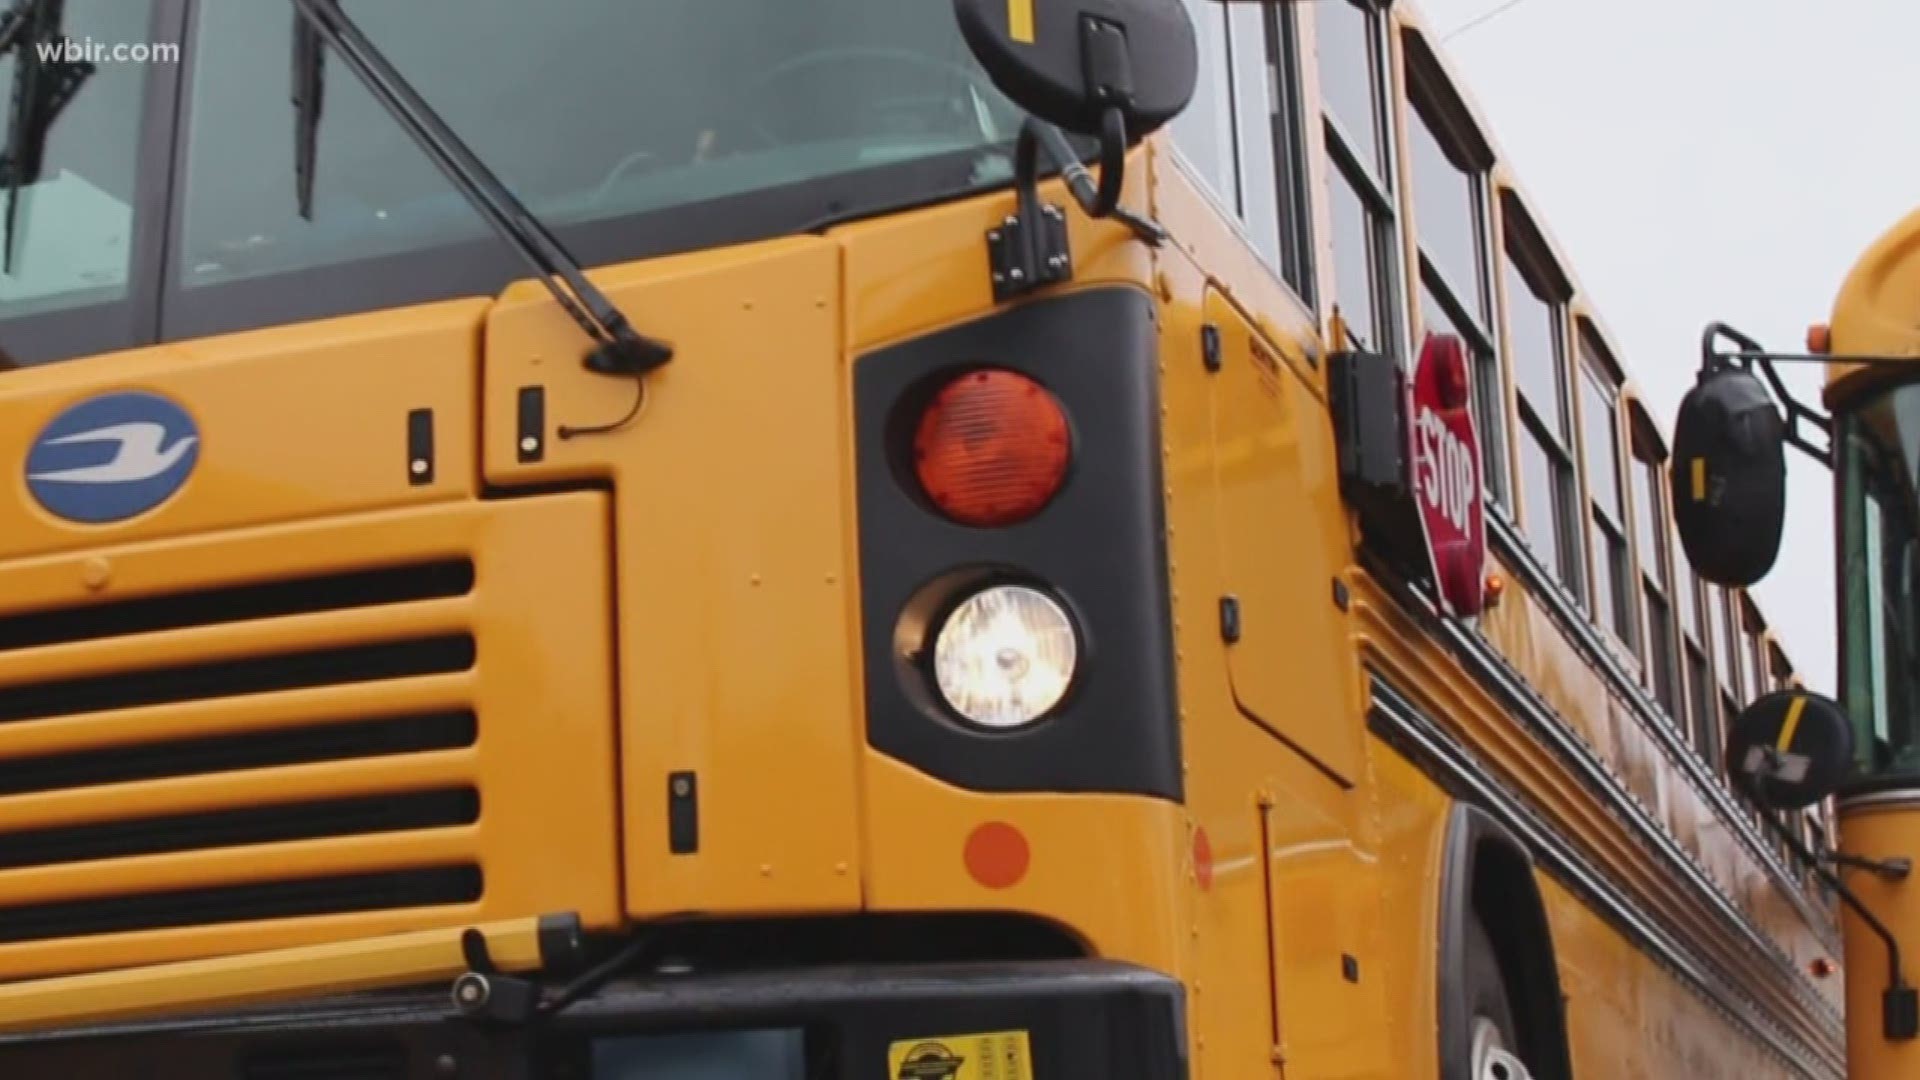 Law enforcement officials want drivers to keep safety in mind when near  school buses.